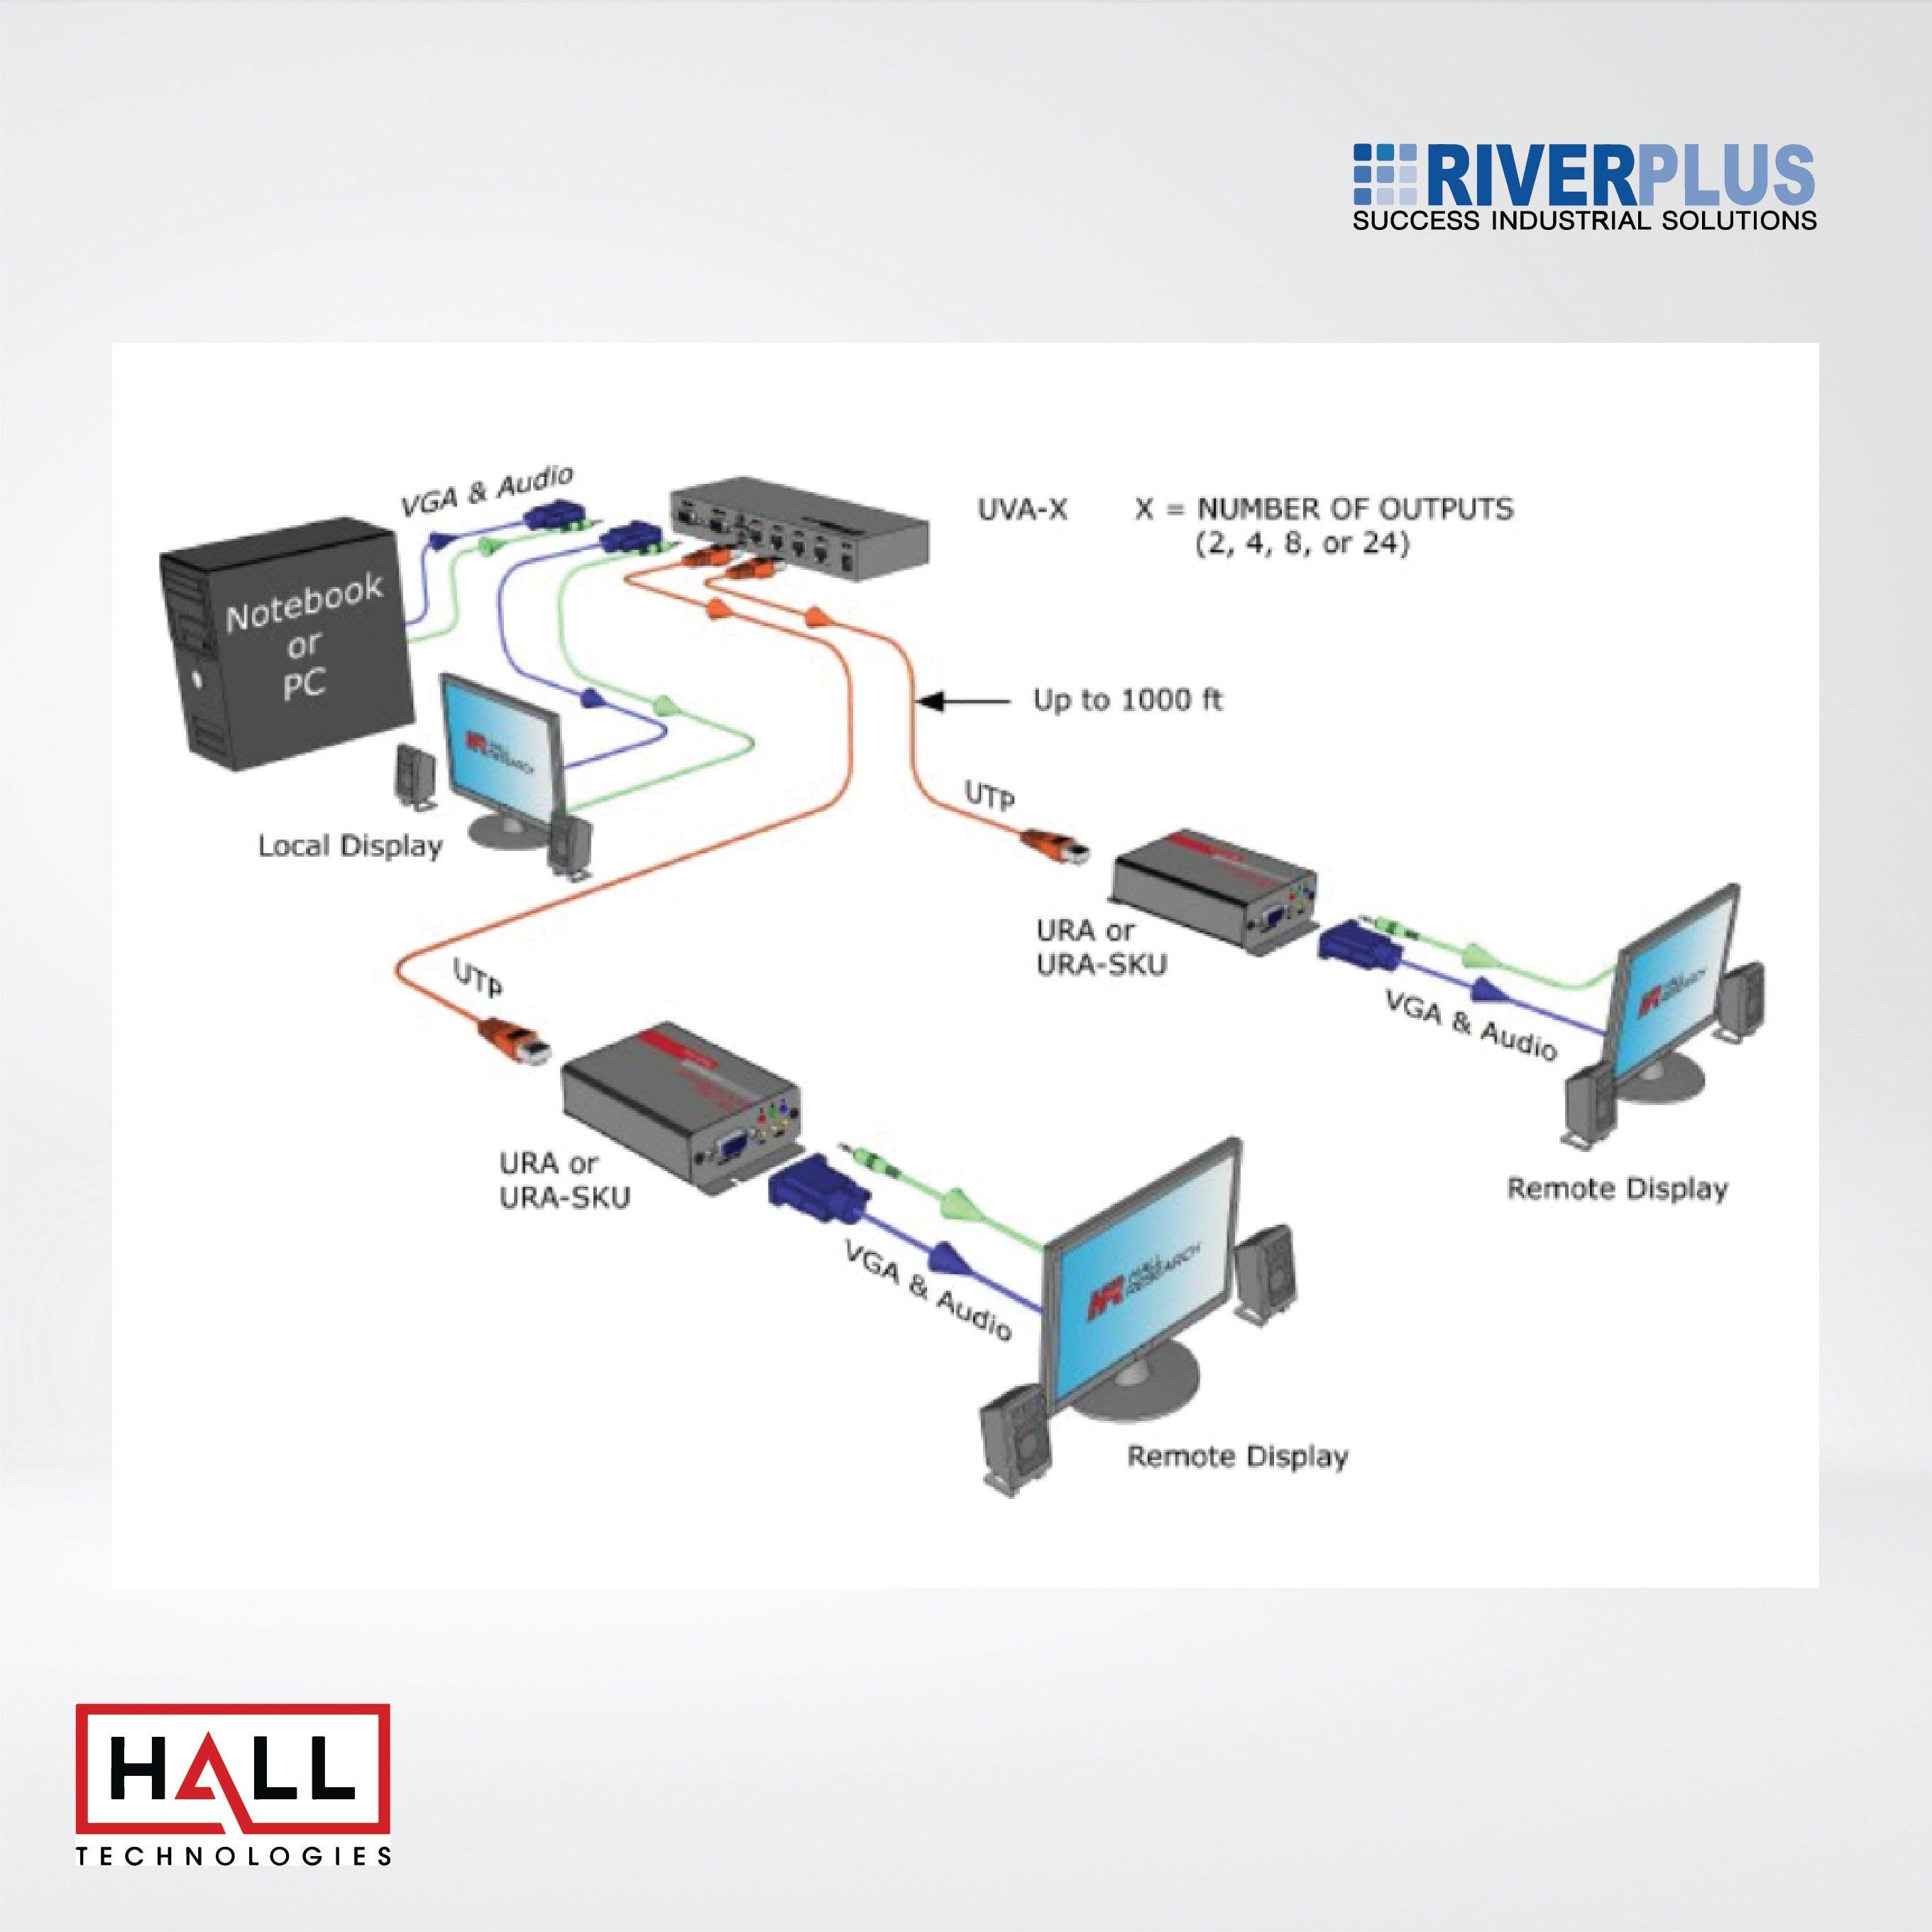 URA-SKU Video and Audio over UTP Receiver with Skew Correction - Riverplus